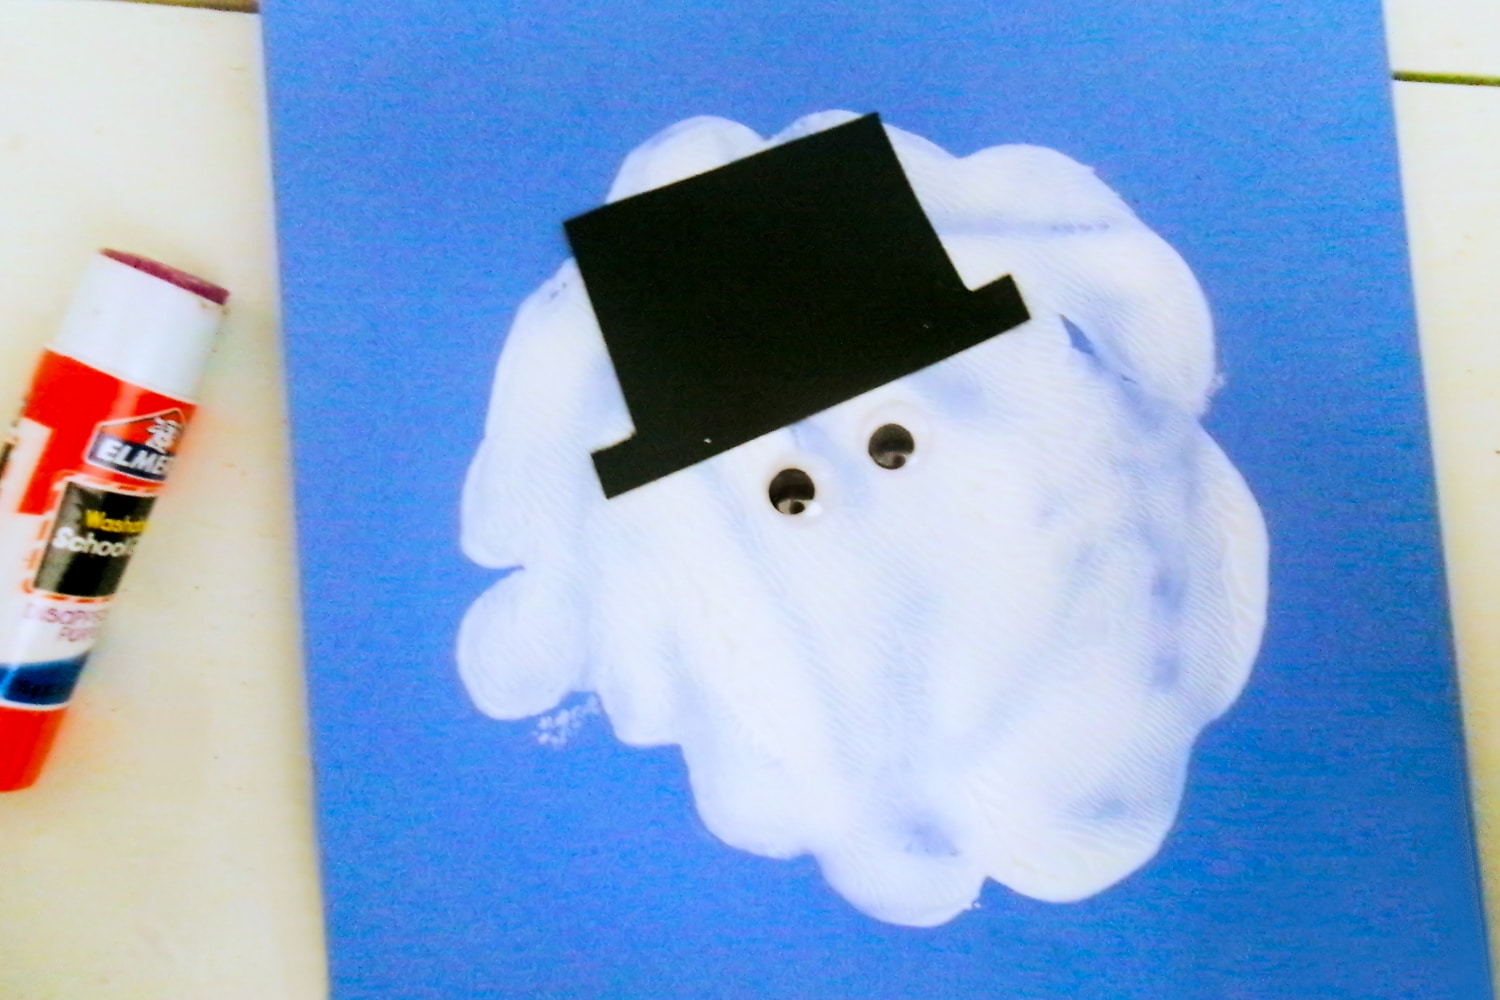 White paint splat with snowman hat and eyes